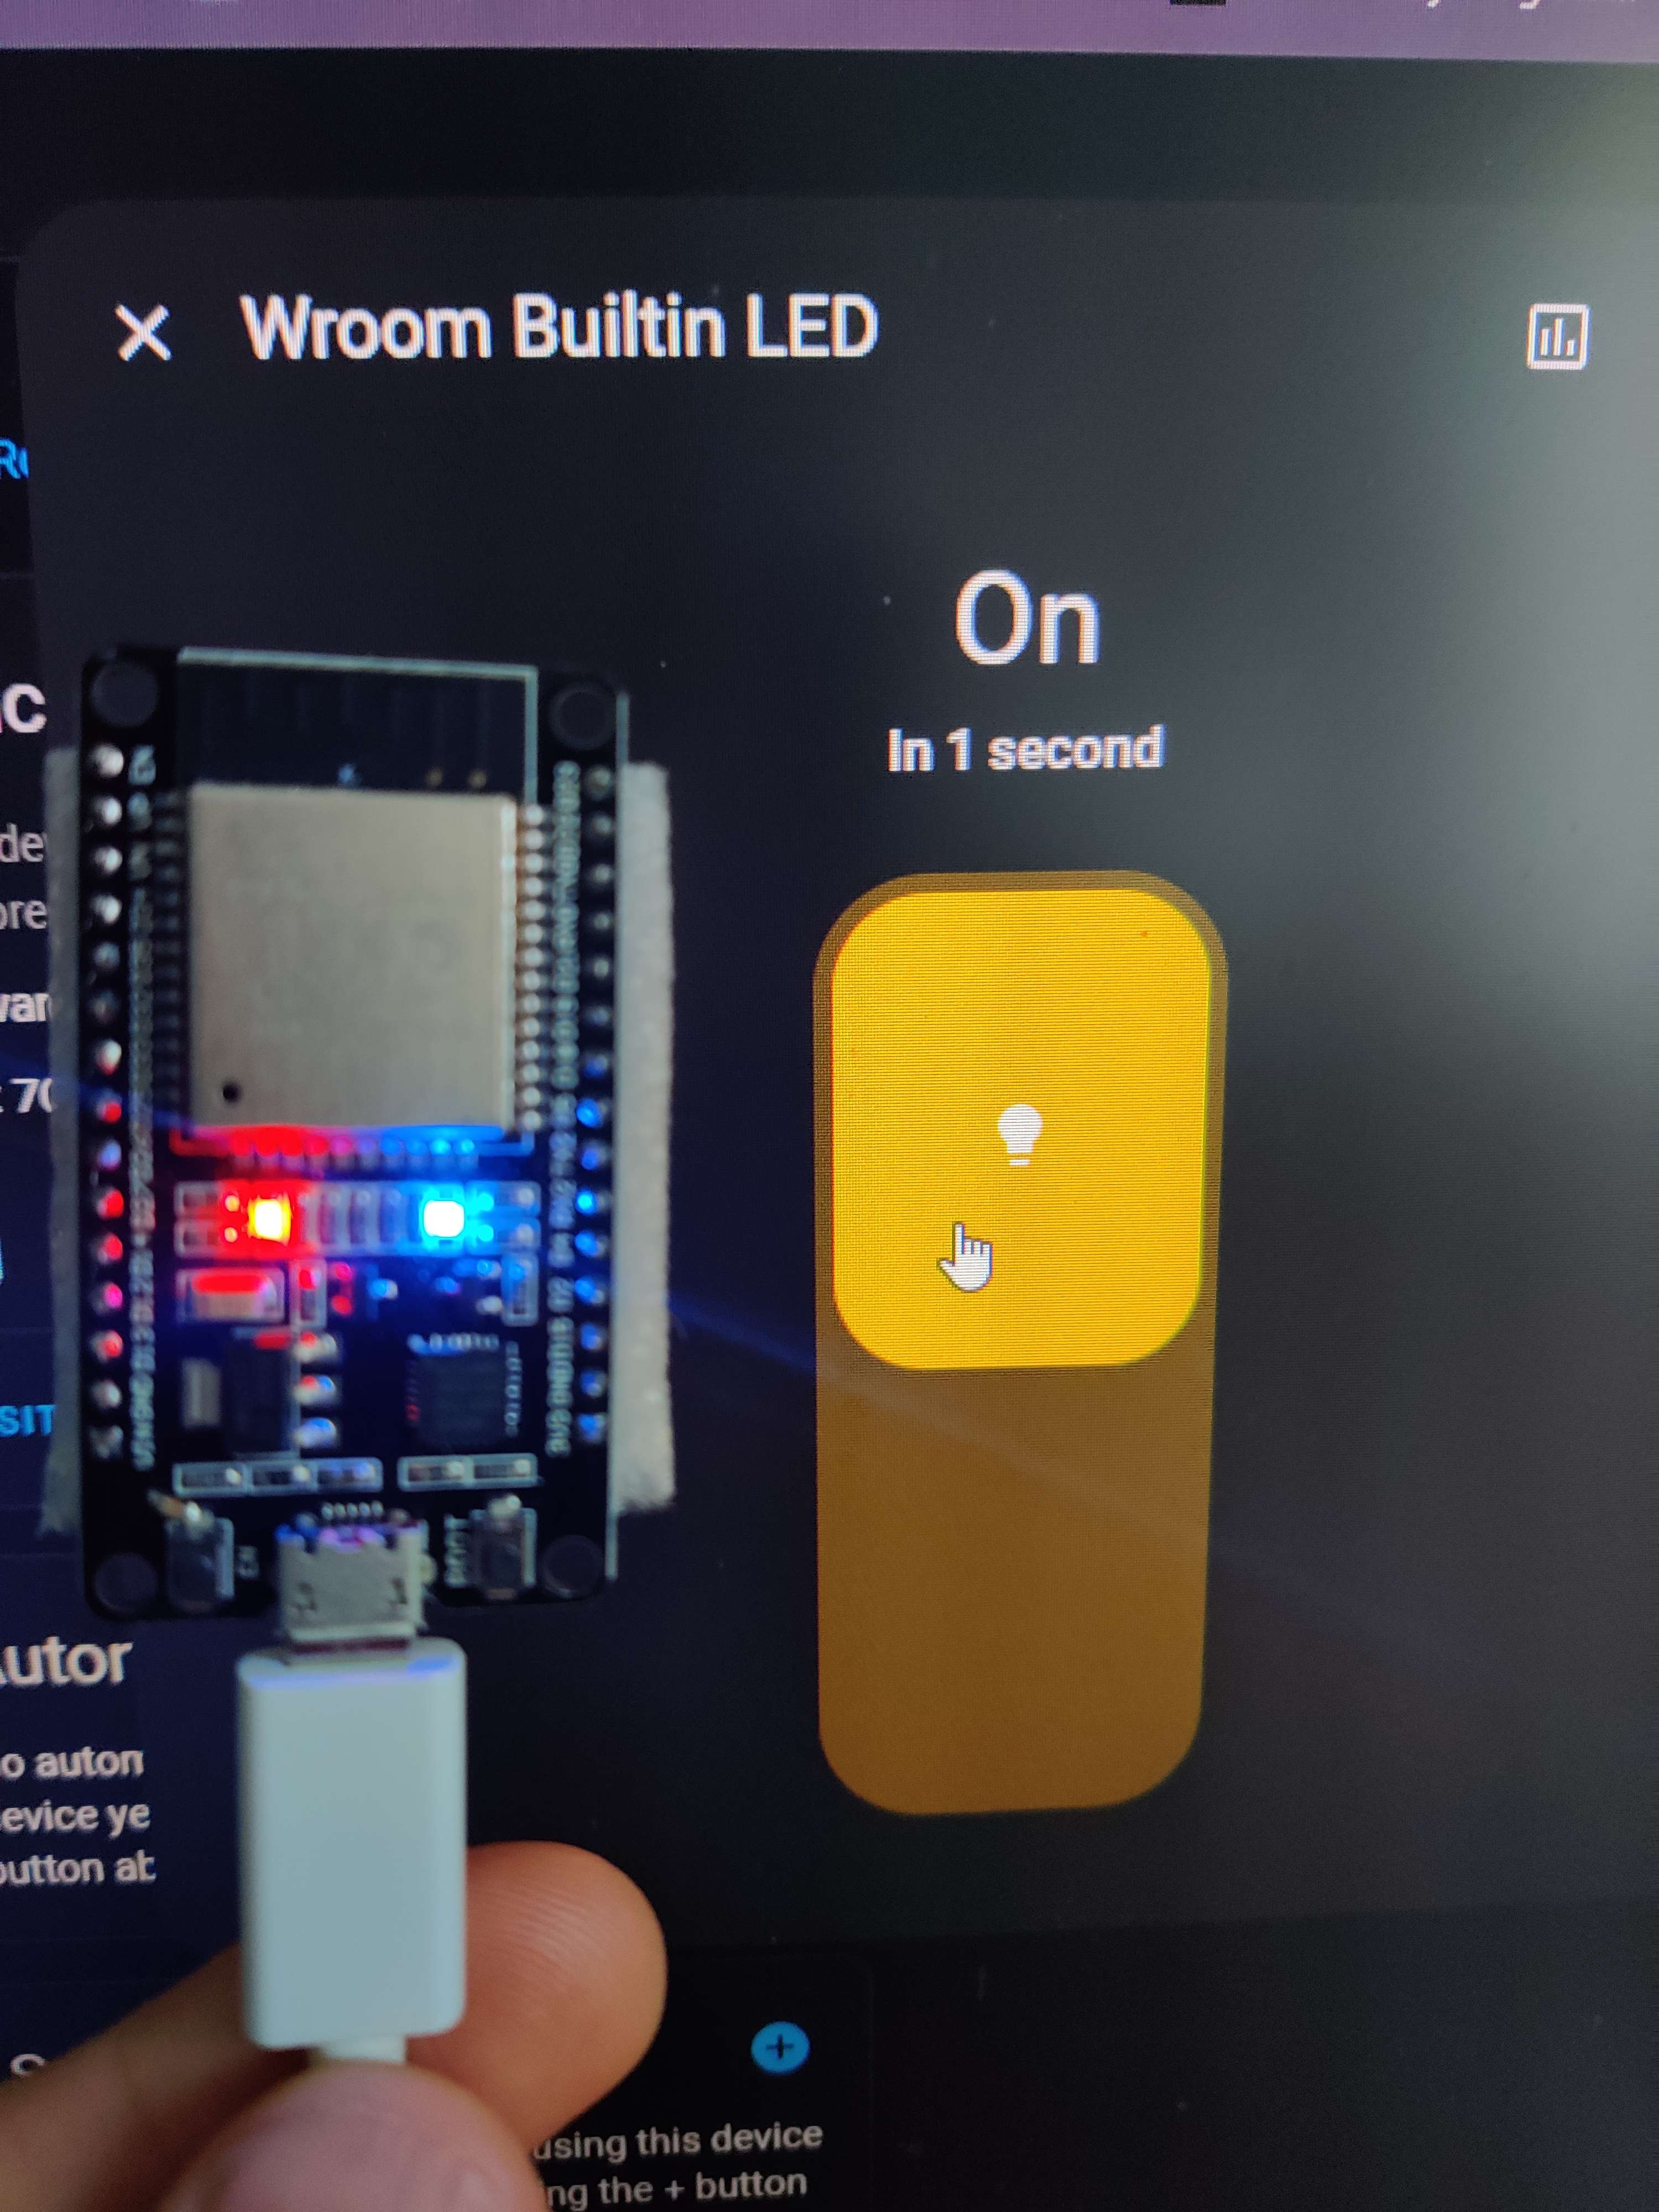 HA interface showing a toggled switch and an ESP board with its builtin LED turned on